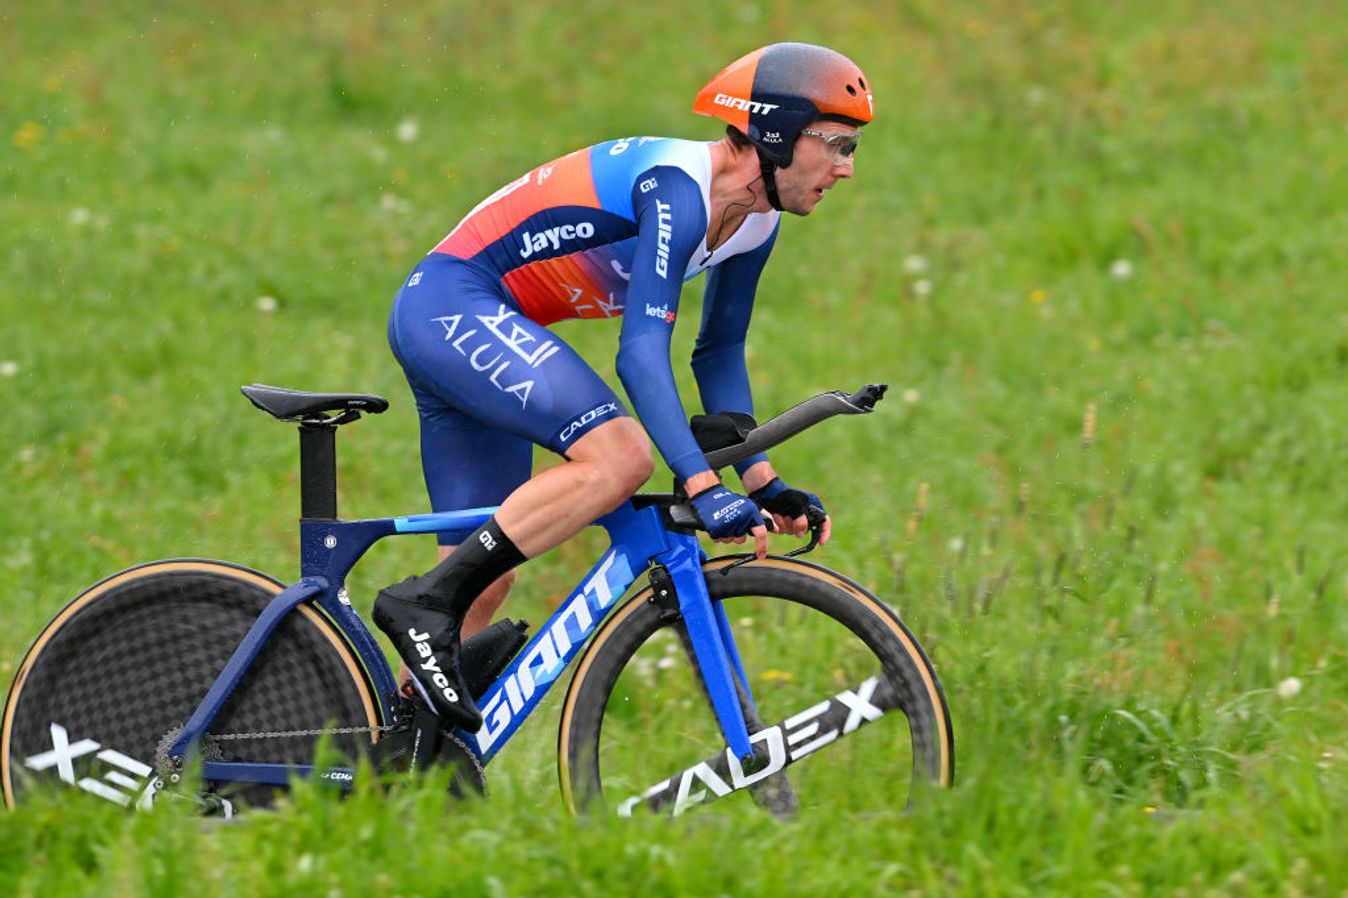 For comparison, Simon Yates rides the old Trinity TT bike in the same time trial